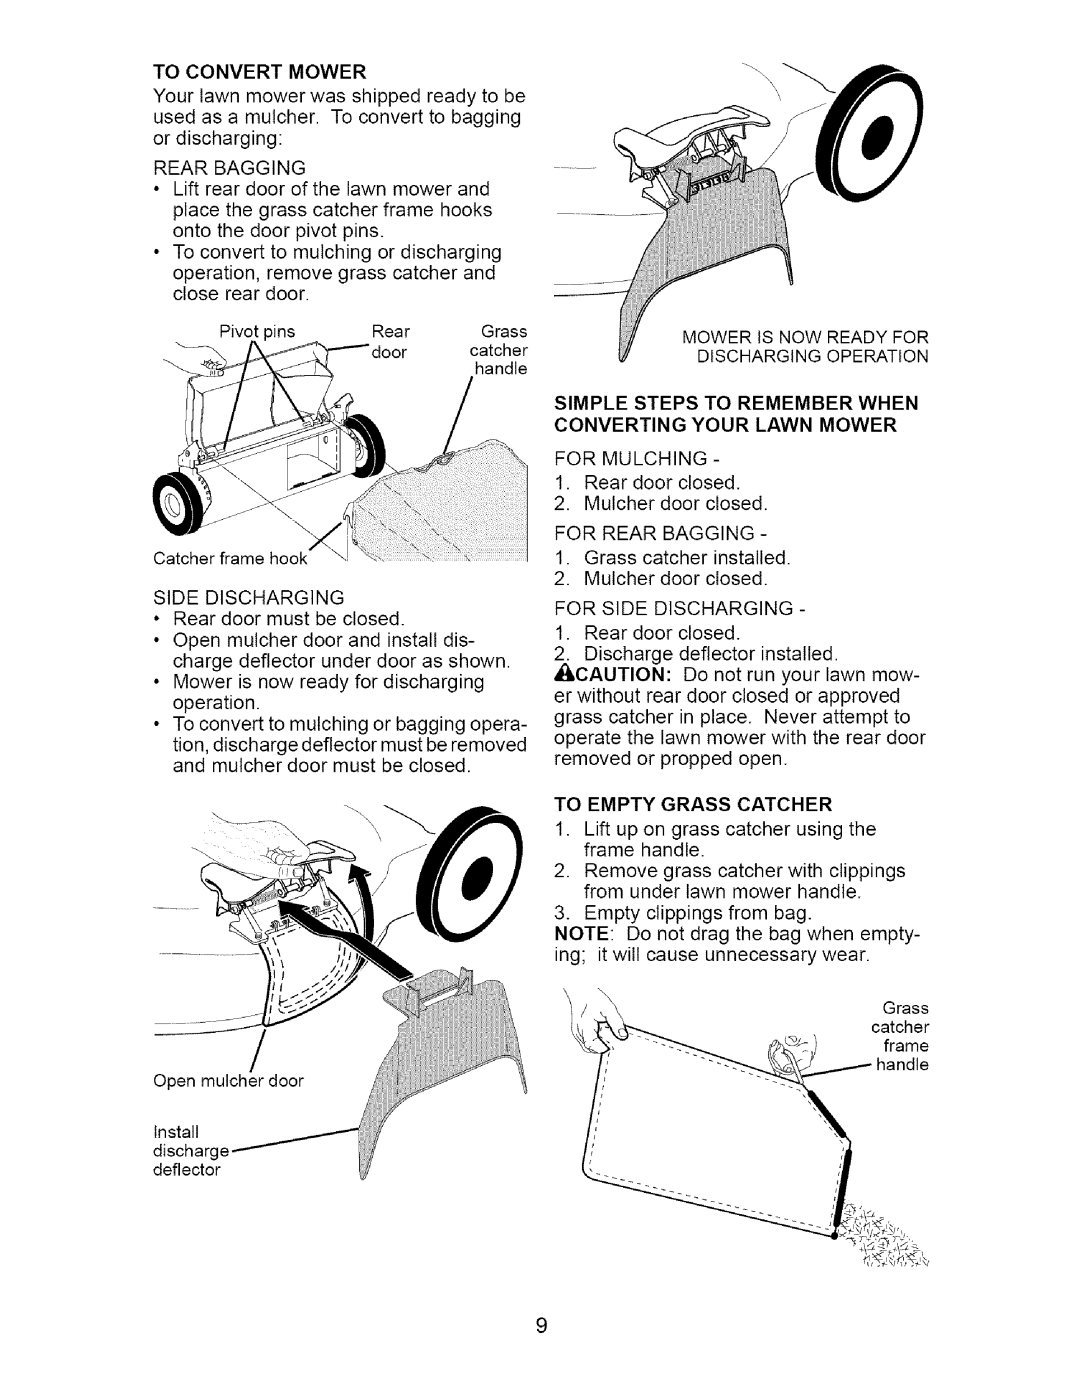 Craftsman 917.371721 owner manual To Convertmower, Simple Steps To Remember When, Converting Your Lawn Mower For Mulching 